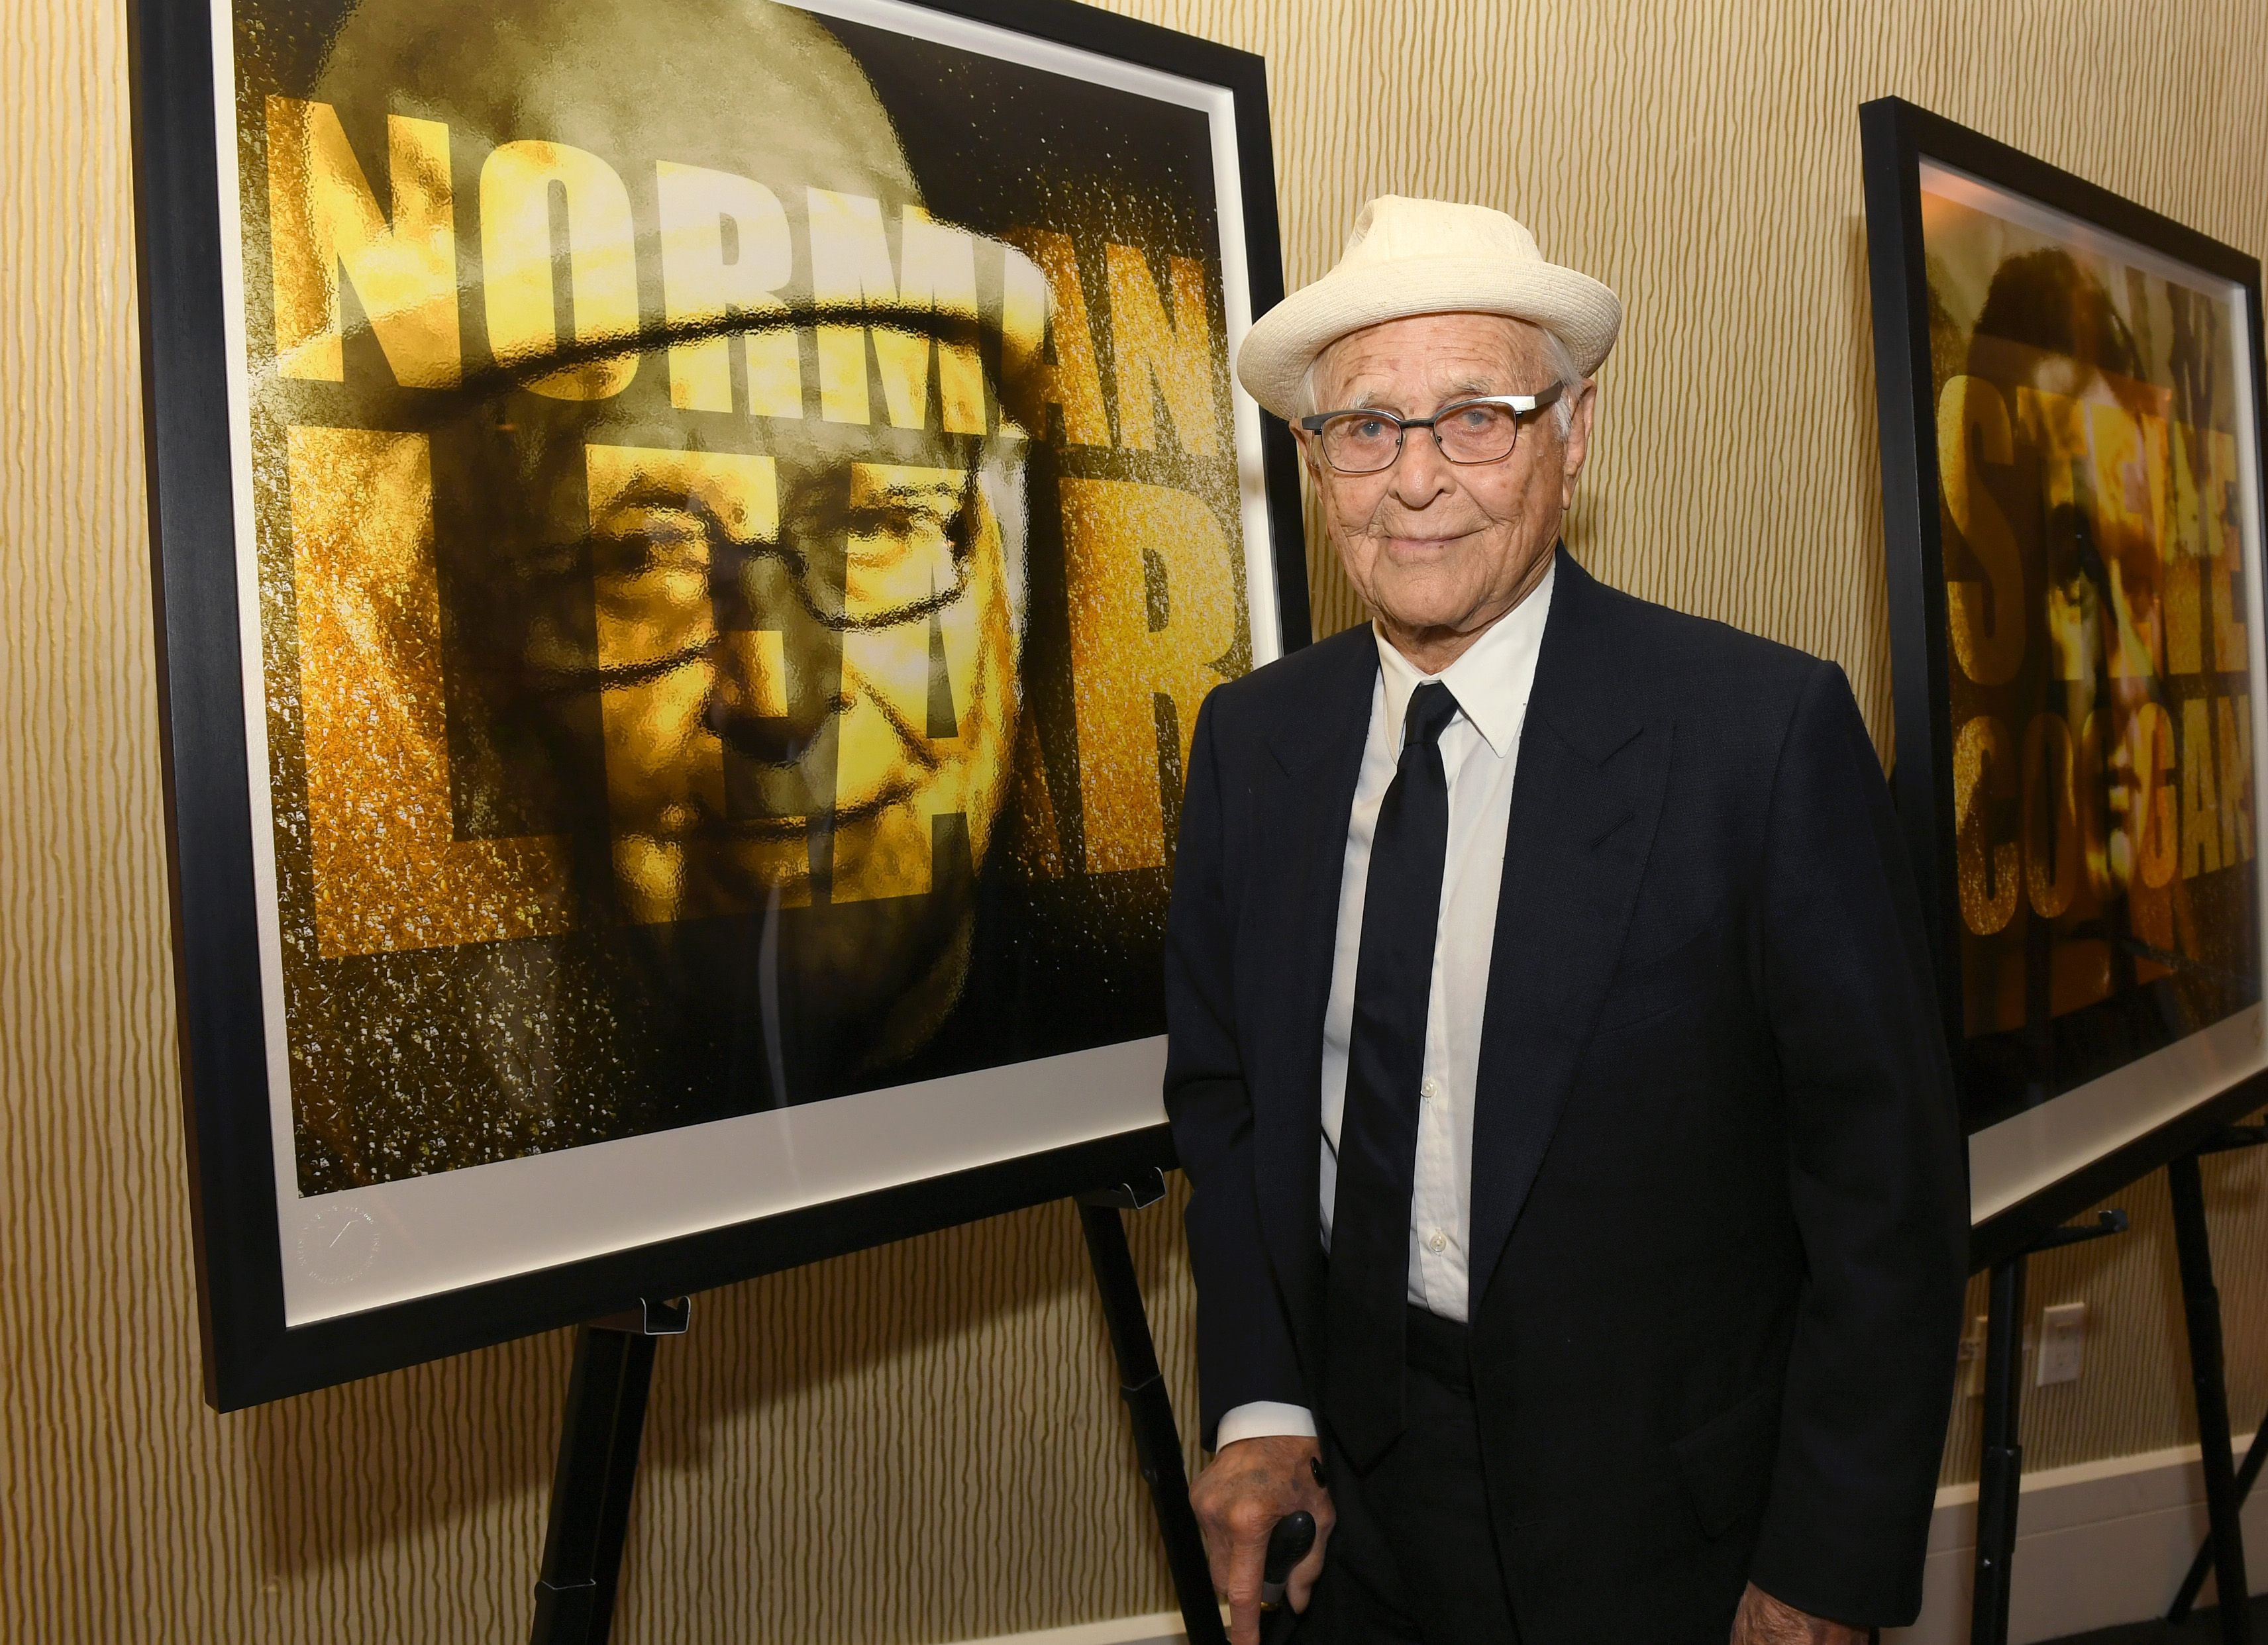  Norman Lear at the 2019 British Academy Britannia Awards in Beverley Hills | Source: Getty Images